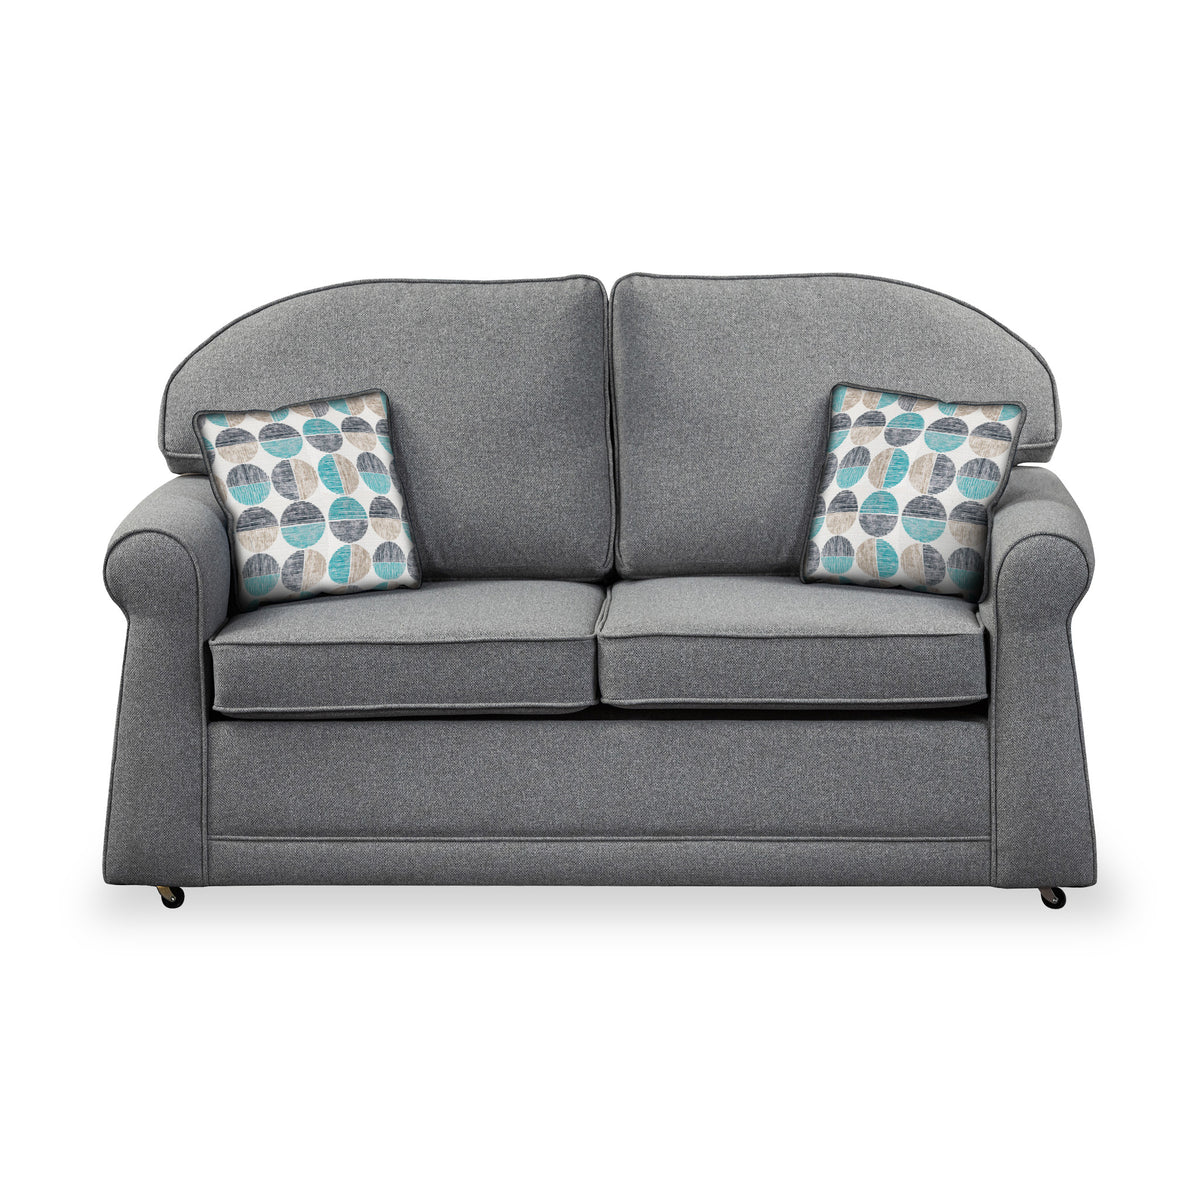 Croxdon Silver Faux Linen 2 Seater Sofabed with Duck Egg Scatter Cushions from Roseland Furniture